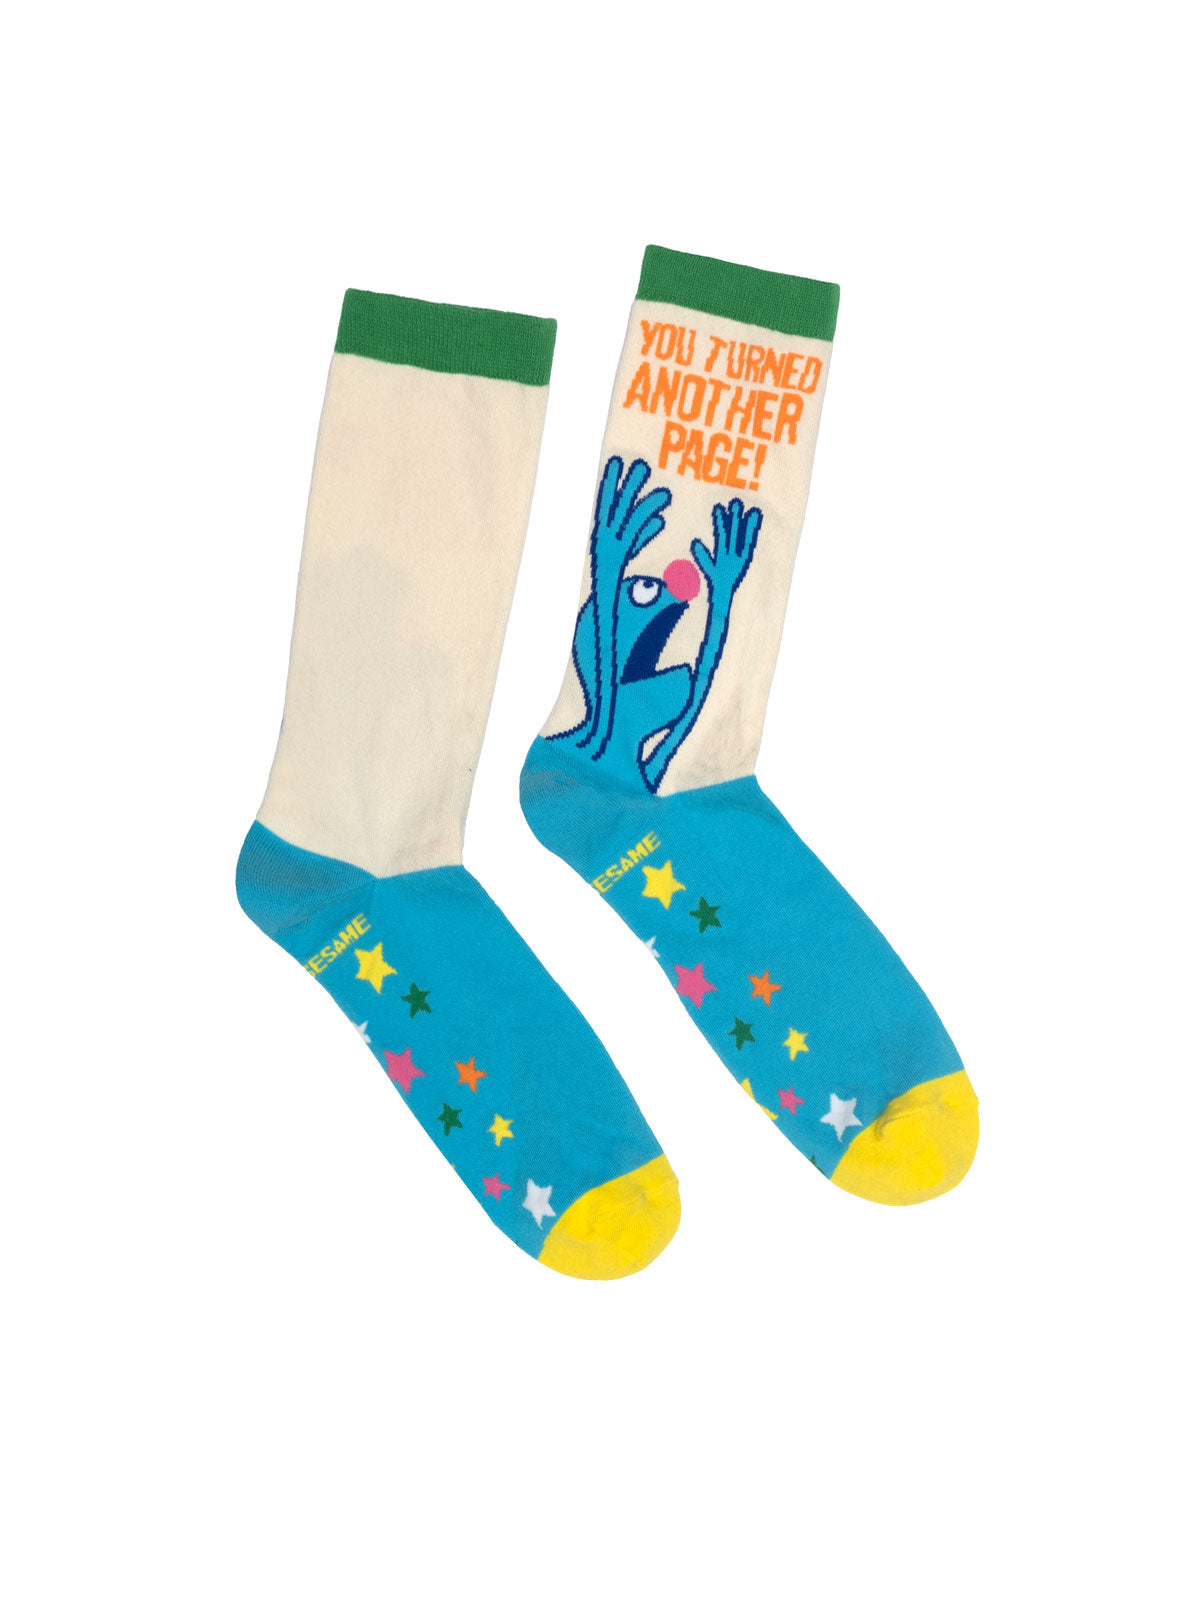 Sesame Street - The Monster at the End of This Book socks — Out of